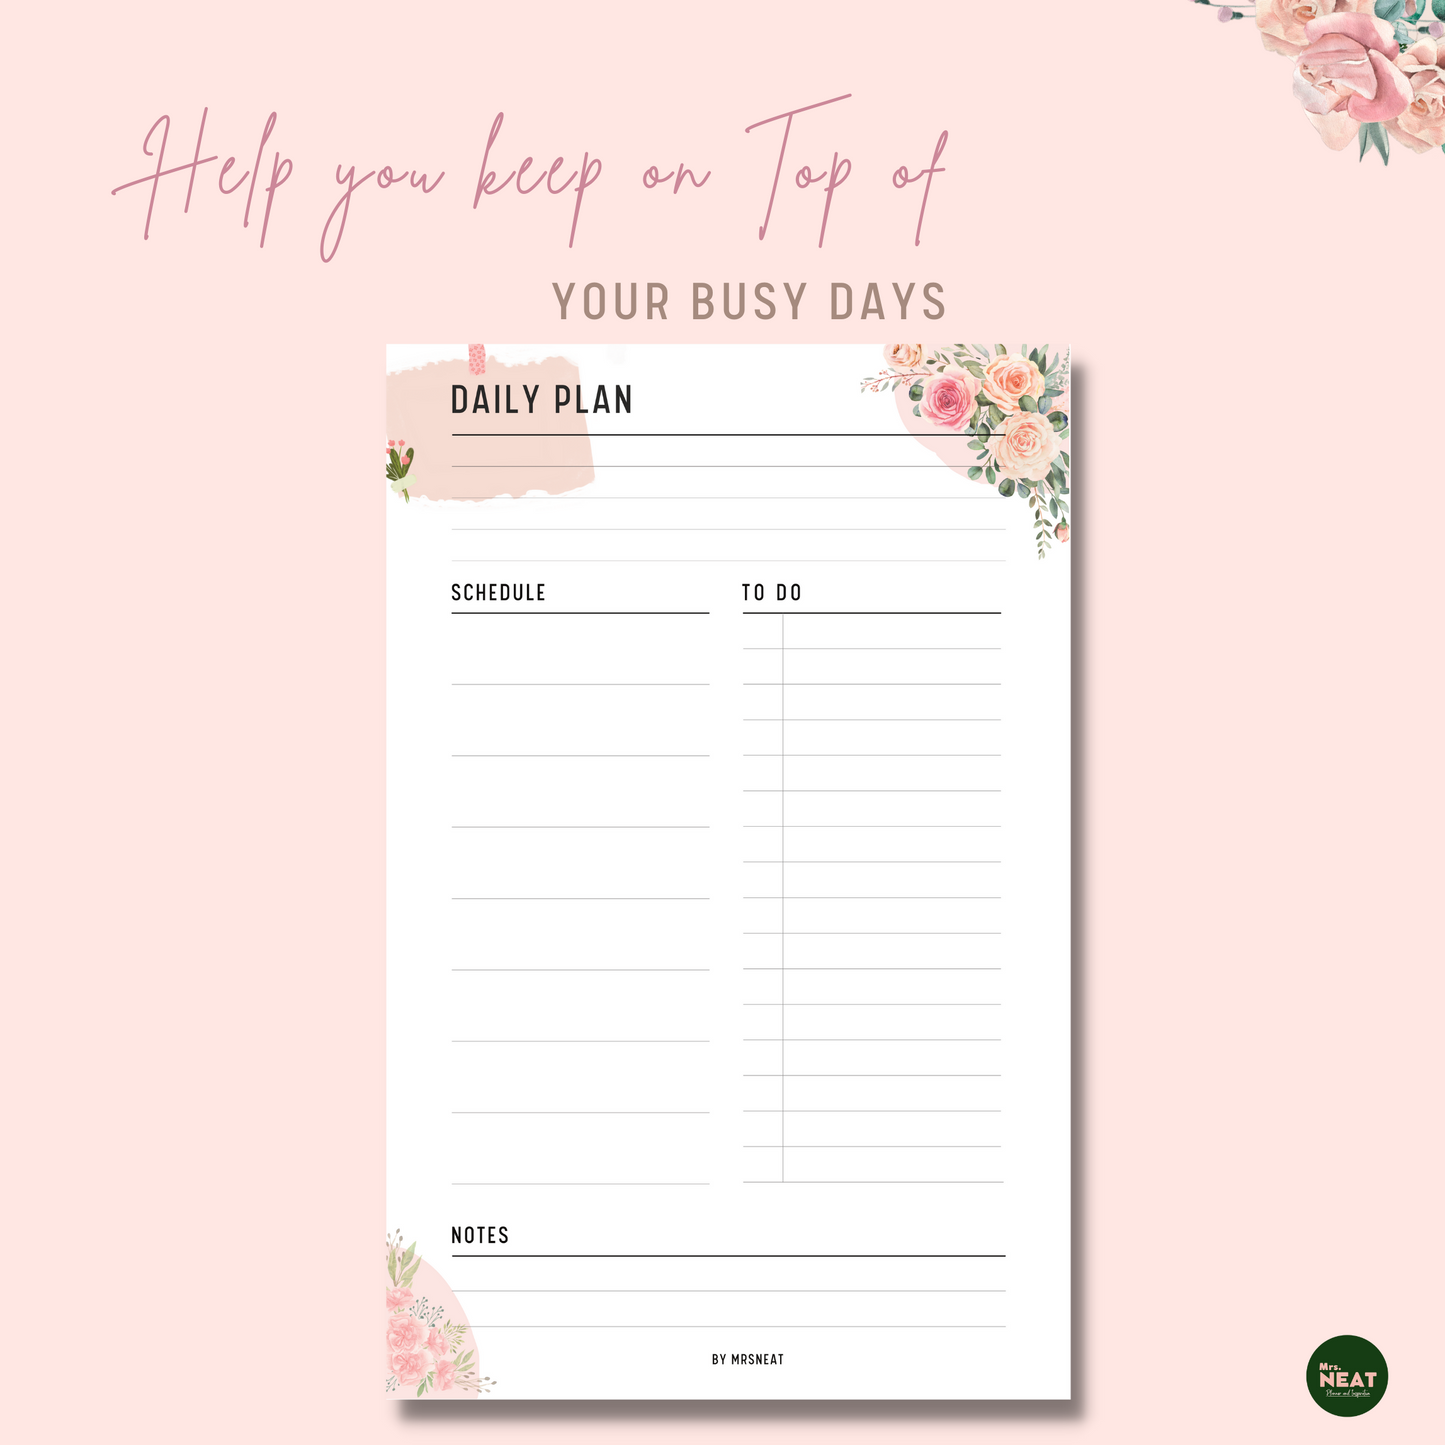 Cute Floral Minimalist Daily Planner to help keep on top of the busy days